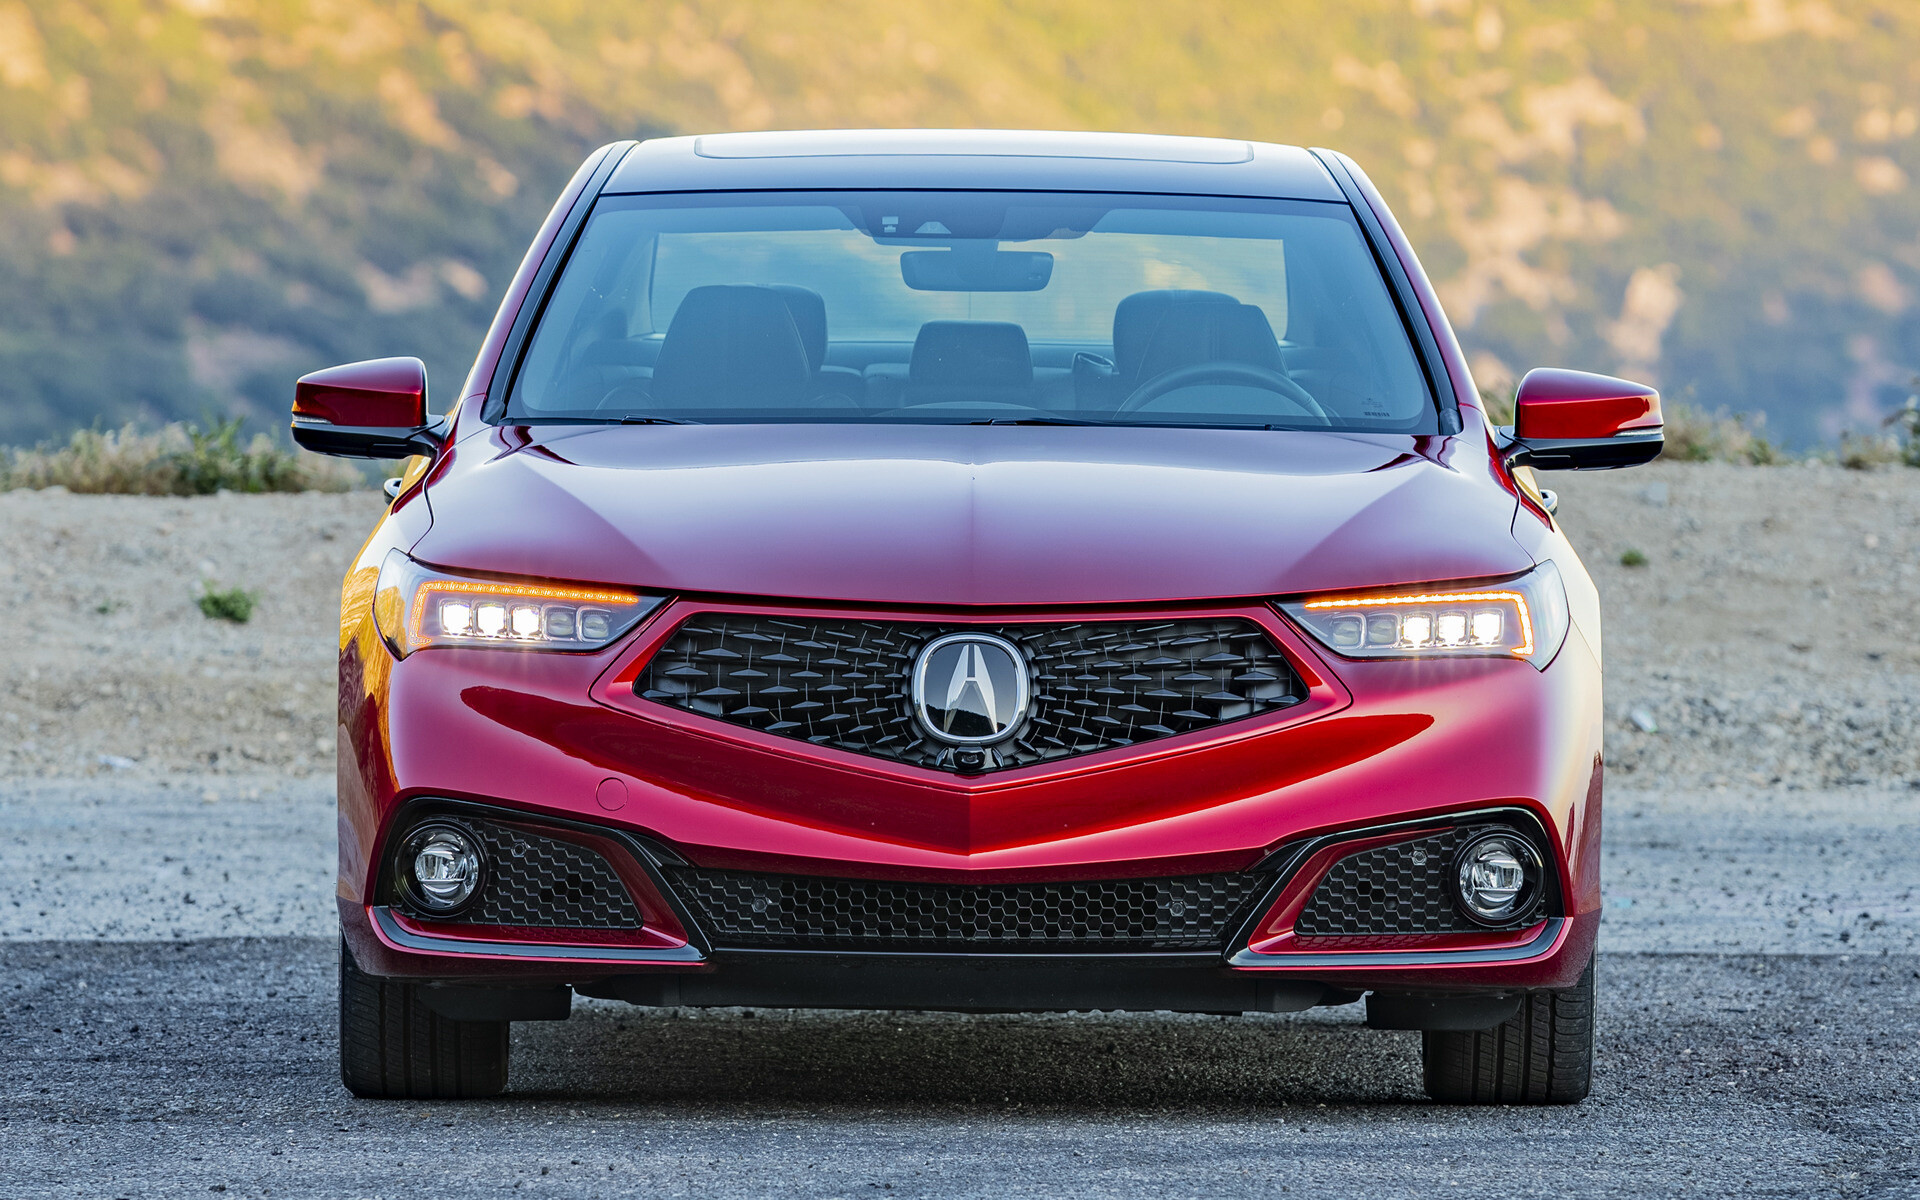 Acura: A Honda luxury division, 2020 TLX PMC Edition. 1920x1200 HD Wallpaper.